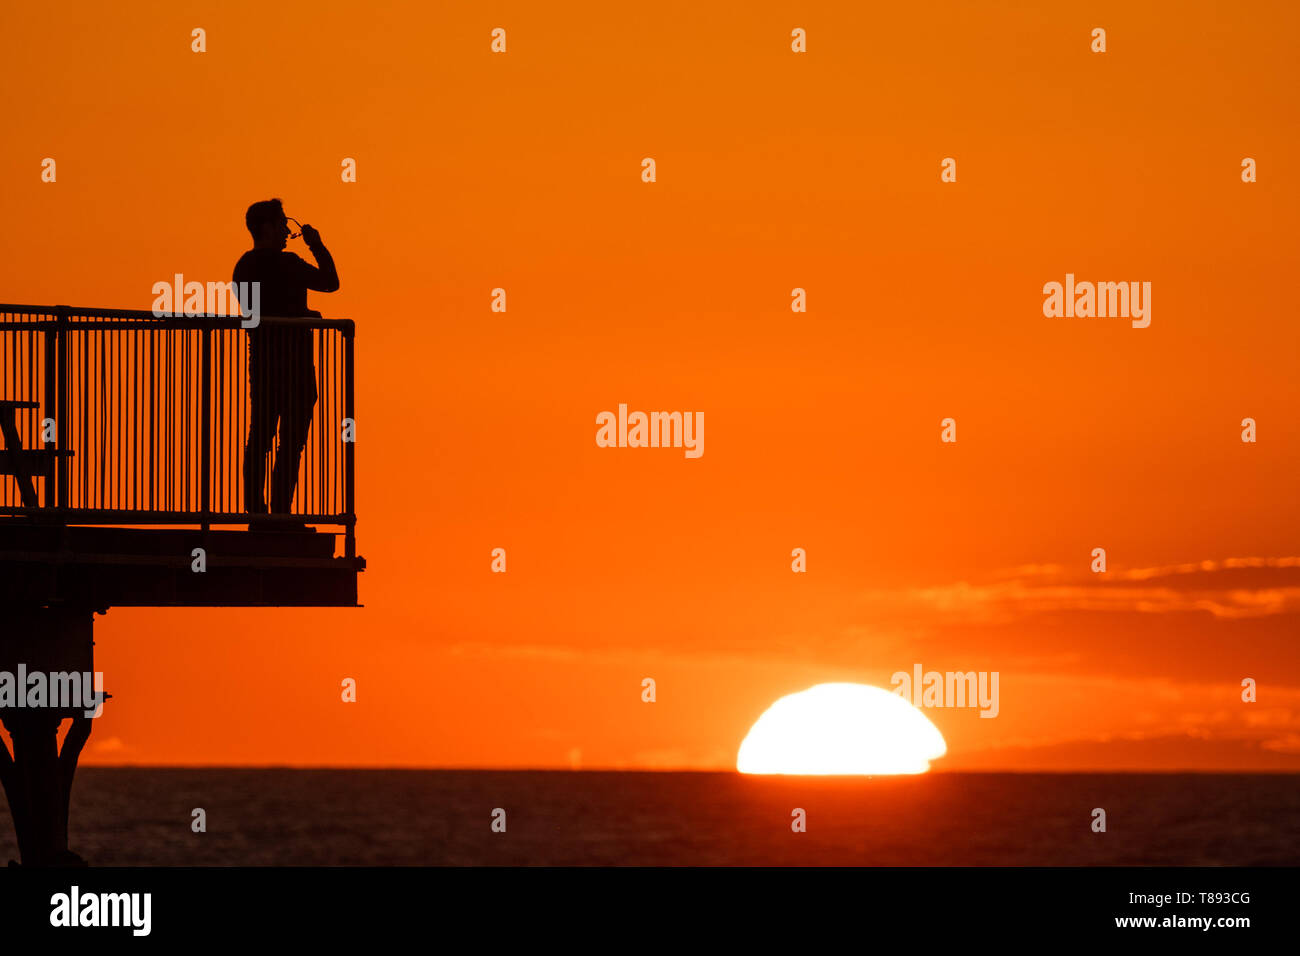 Aberystwyth Wales UK, Saturday 11 May 2019  UK Weather: People are silhouetted  against the glorious setting sun as they stand on the pier in Aberystwyth on the Cardigan Bay coast, West Wales. The weather is set to get warmer again in the coming week after as period of unsettled cold conditions.   photo credit Keith Morris / Alamy Live News Stock Photo